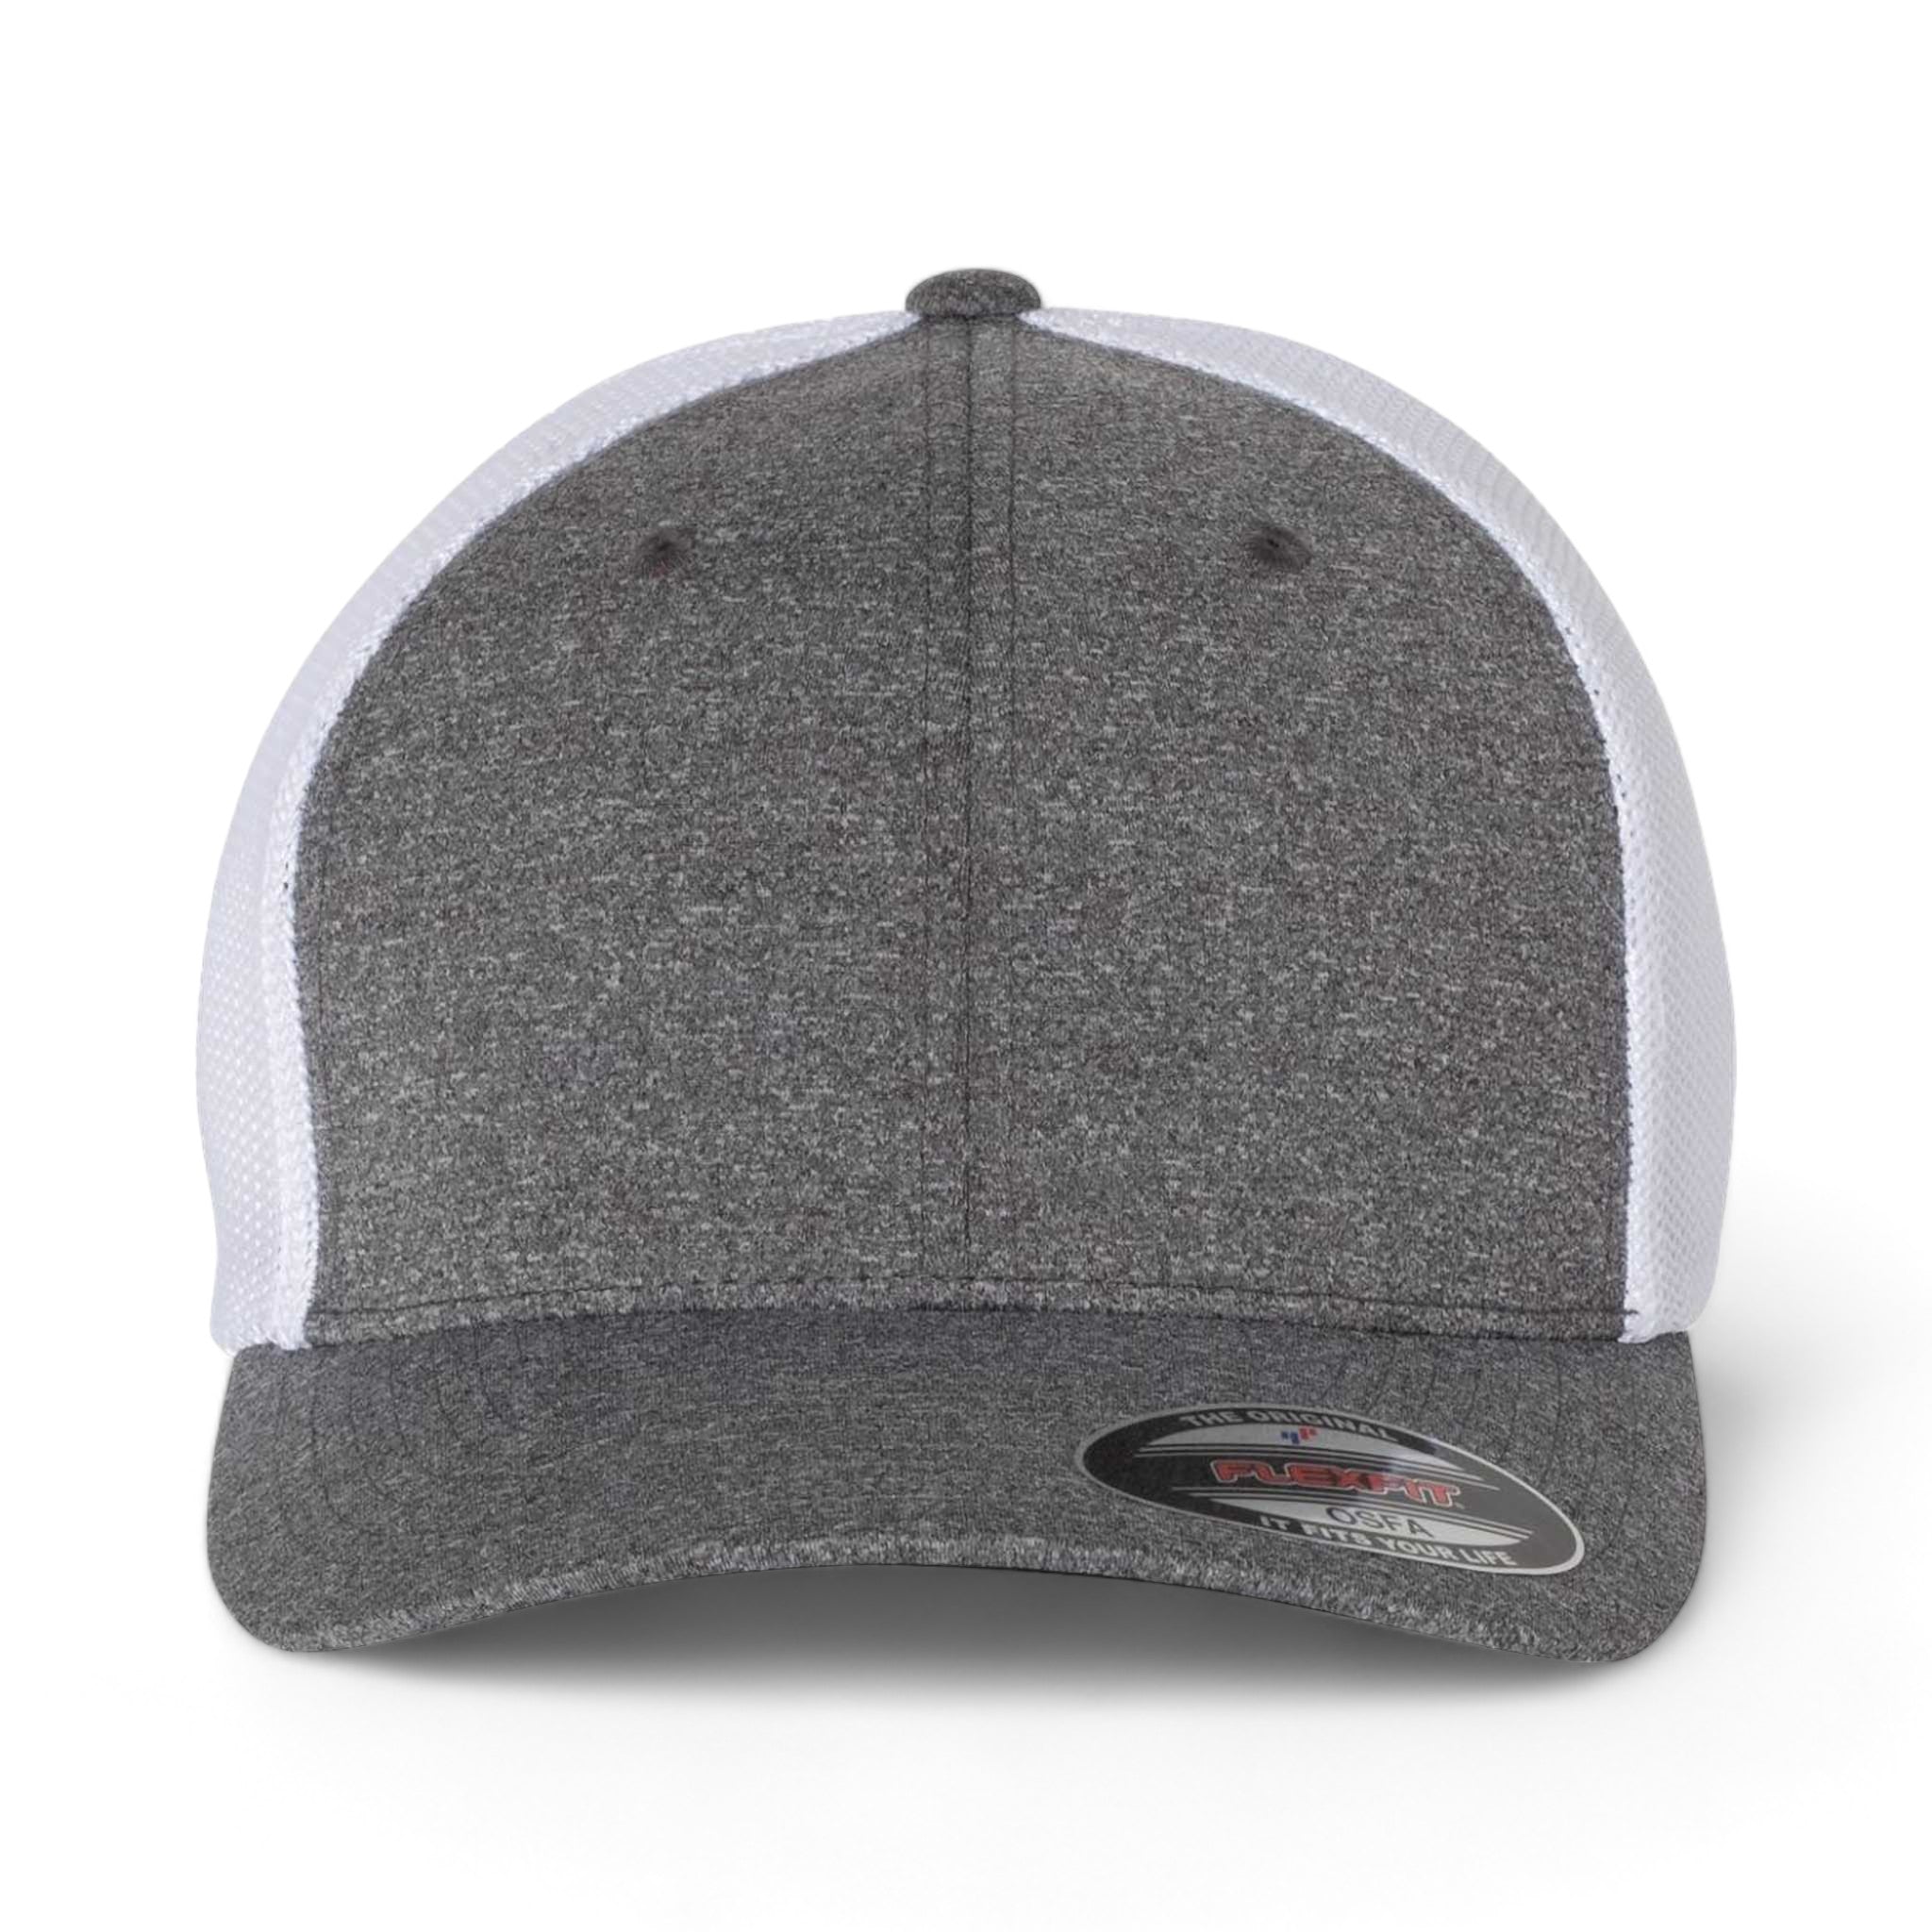 Front view of Flexfit 6311 custom hat in dark heather grey and white